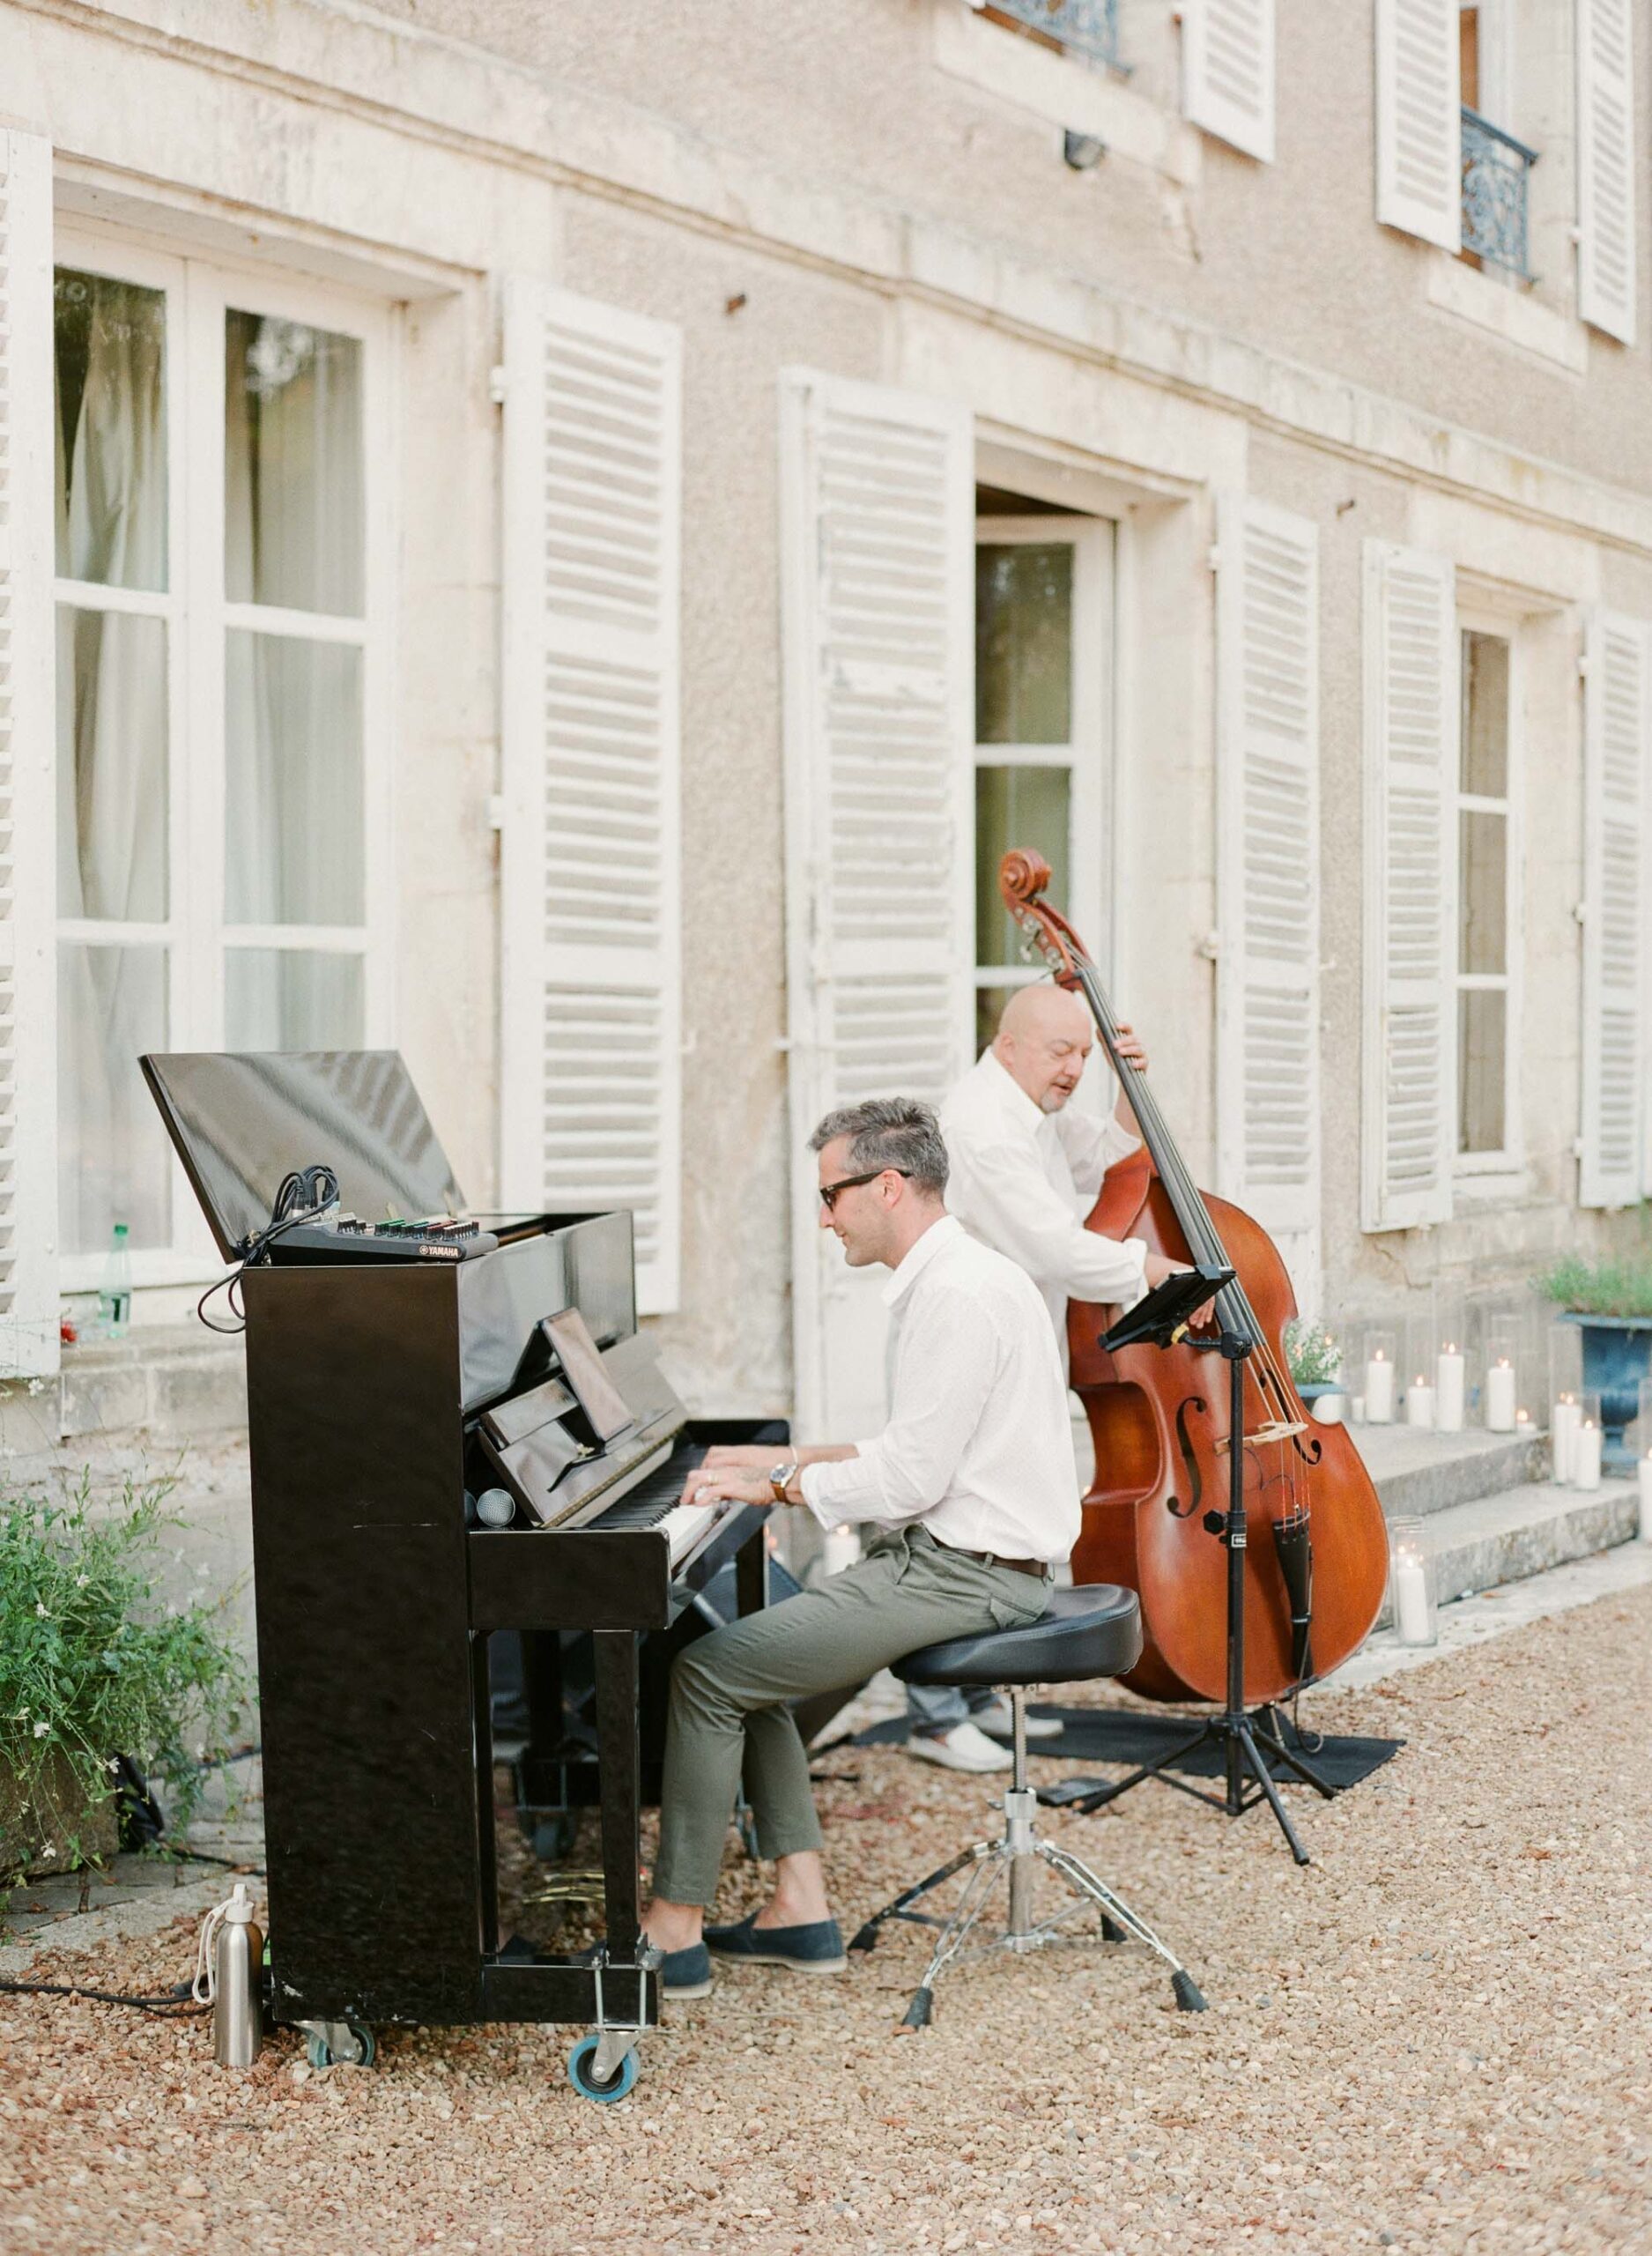 Chateau Bouthonvilliers Wedding Photographer | Loire Valley Wedding | France Film Photographer | Molly Carr Photography